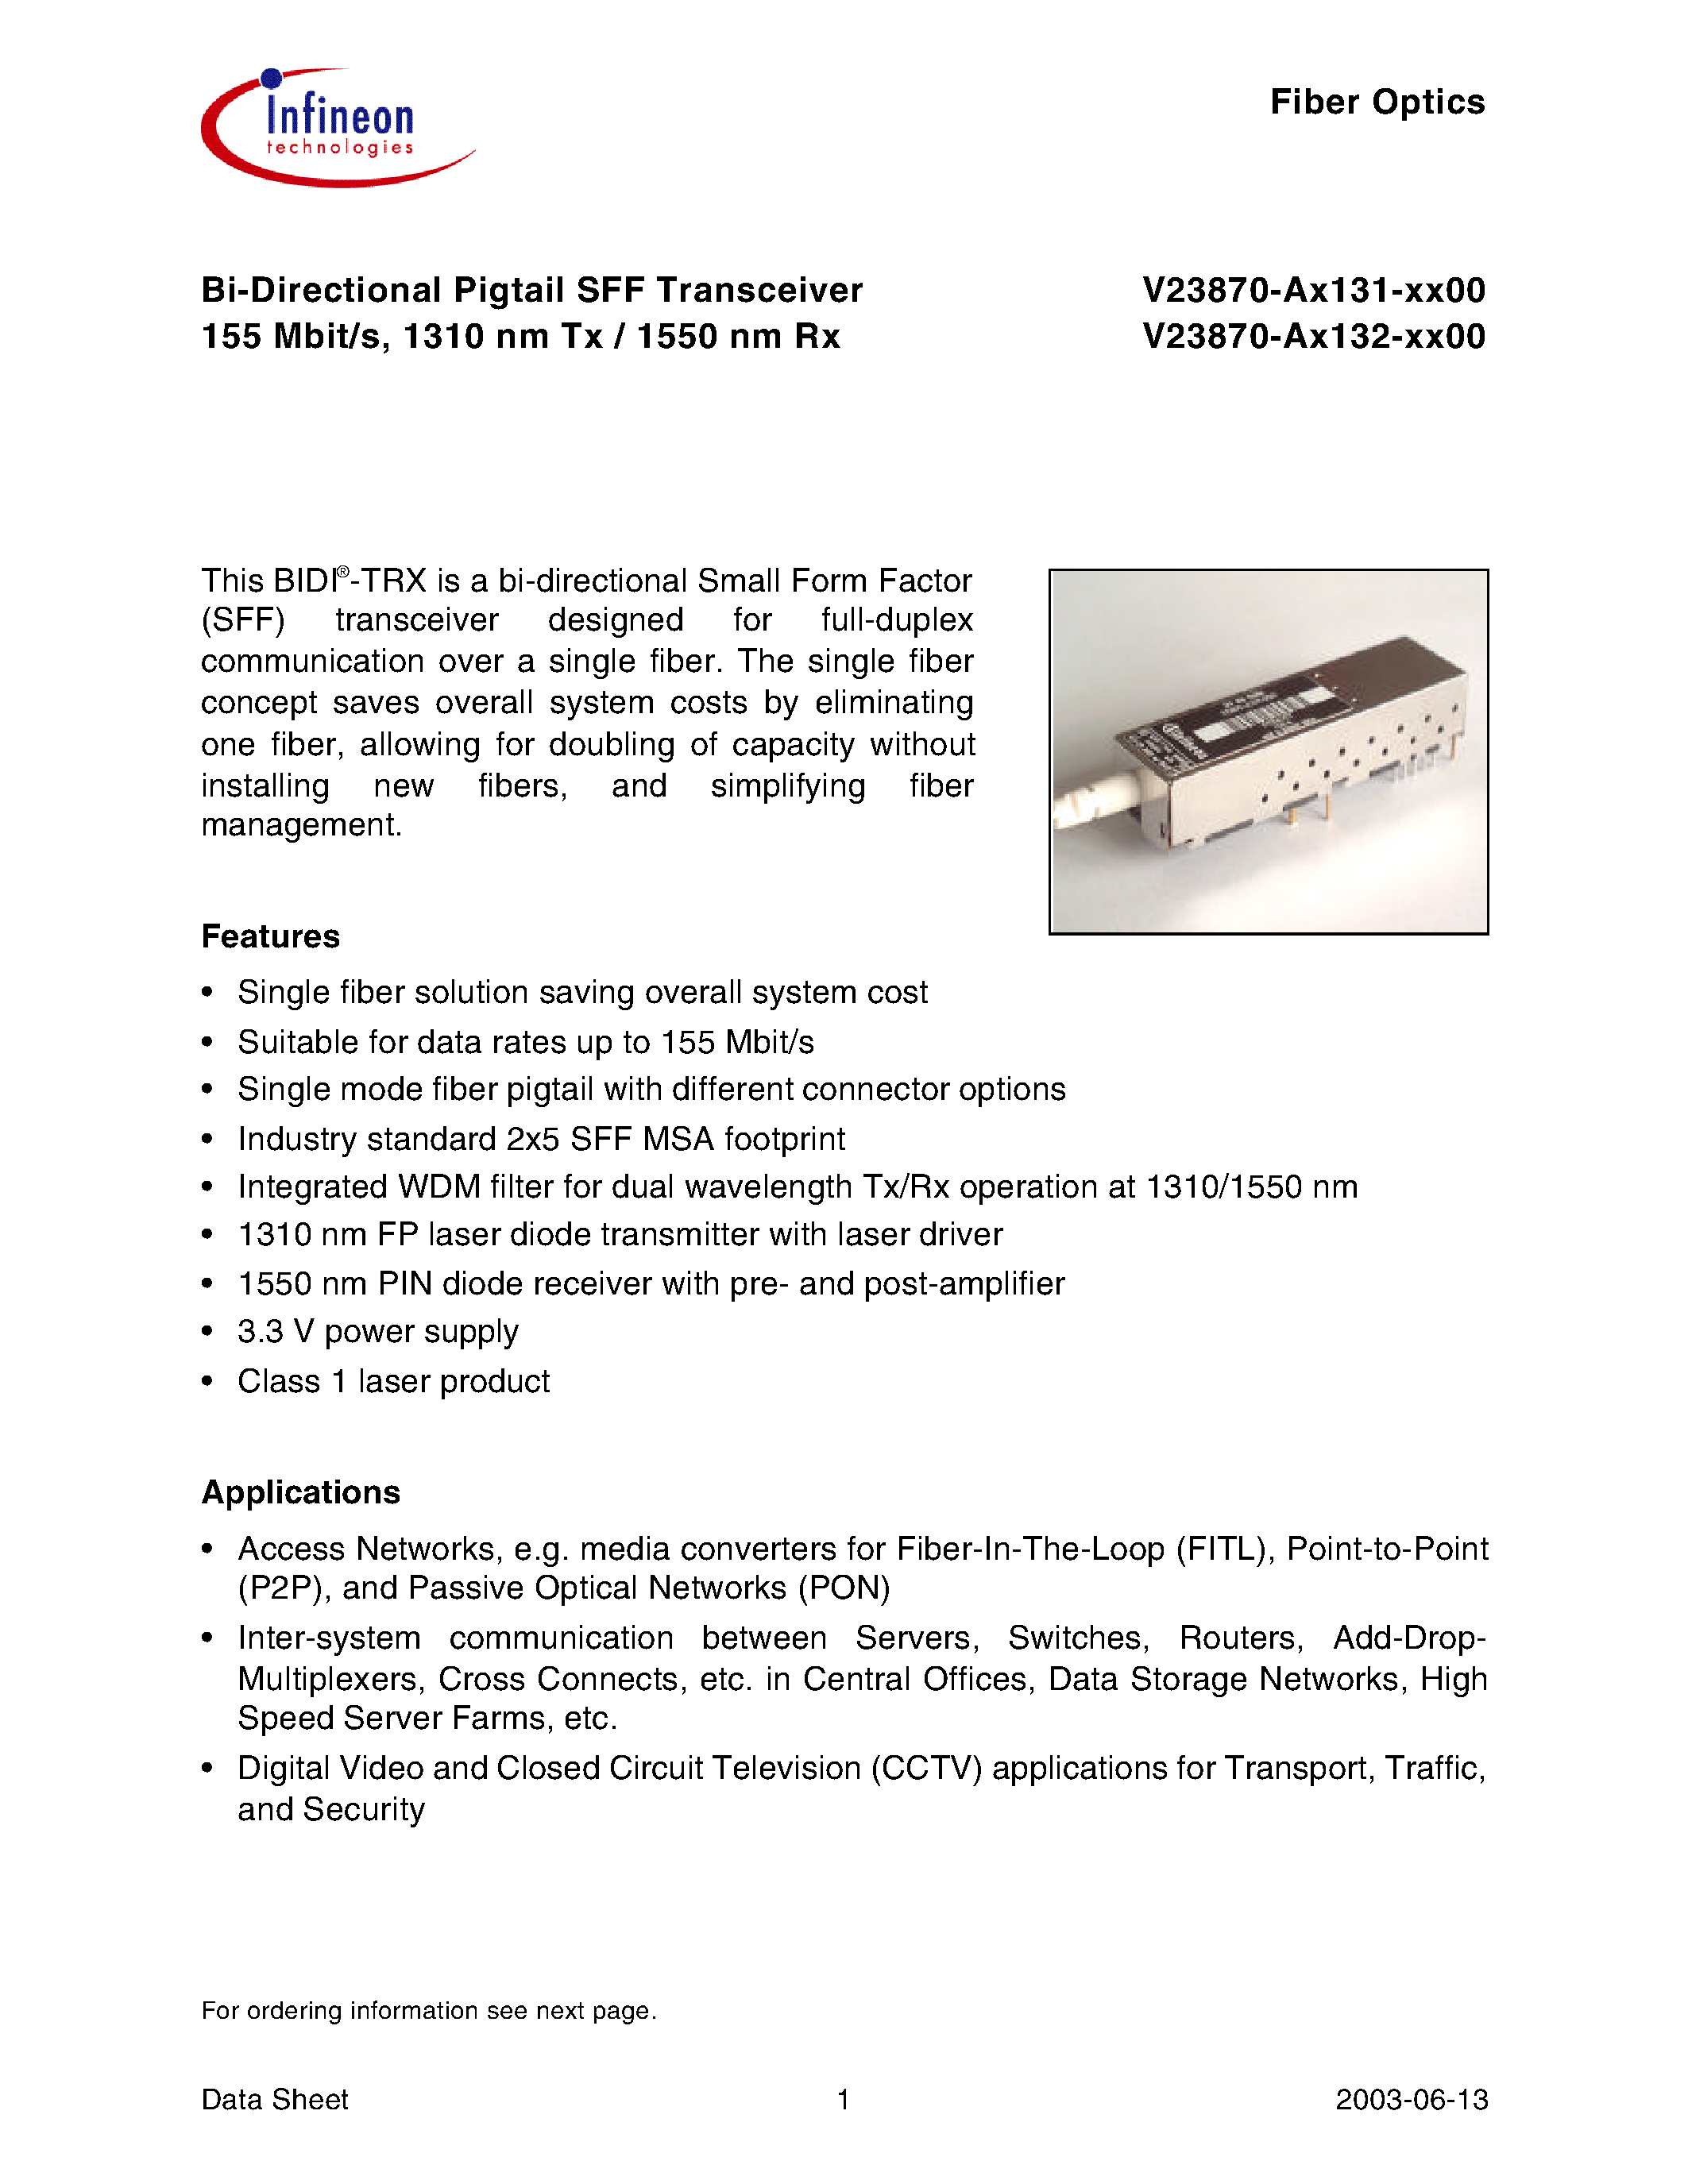 Datasheet V23870-A3131-A100 - Bi-Directional Pigtail SFF Transceiver 155 Mbit/s/ 1310 nm Tx / 1550 nm Rx page 1